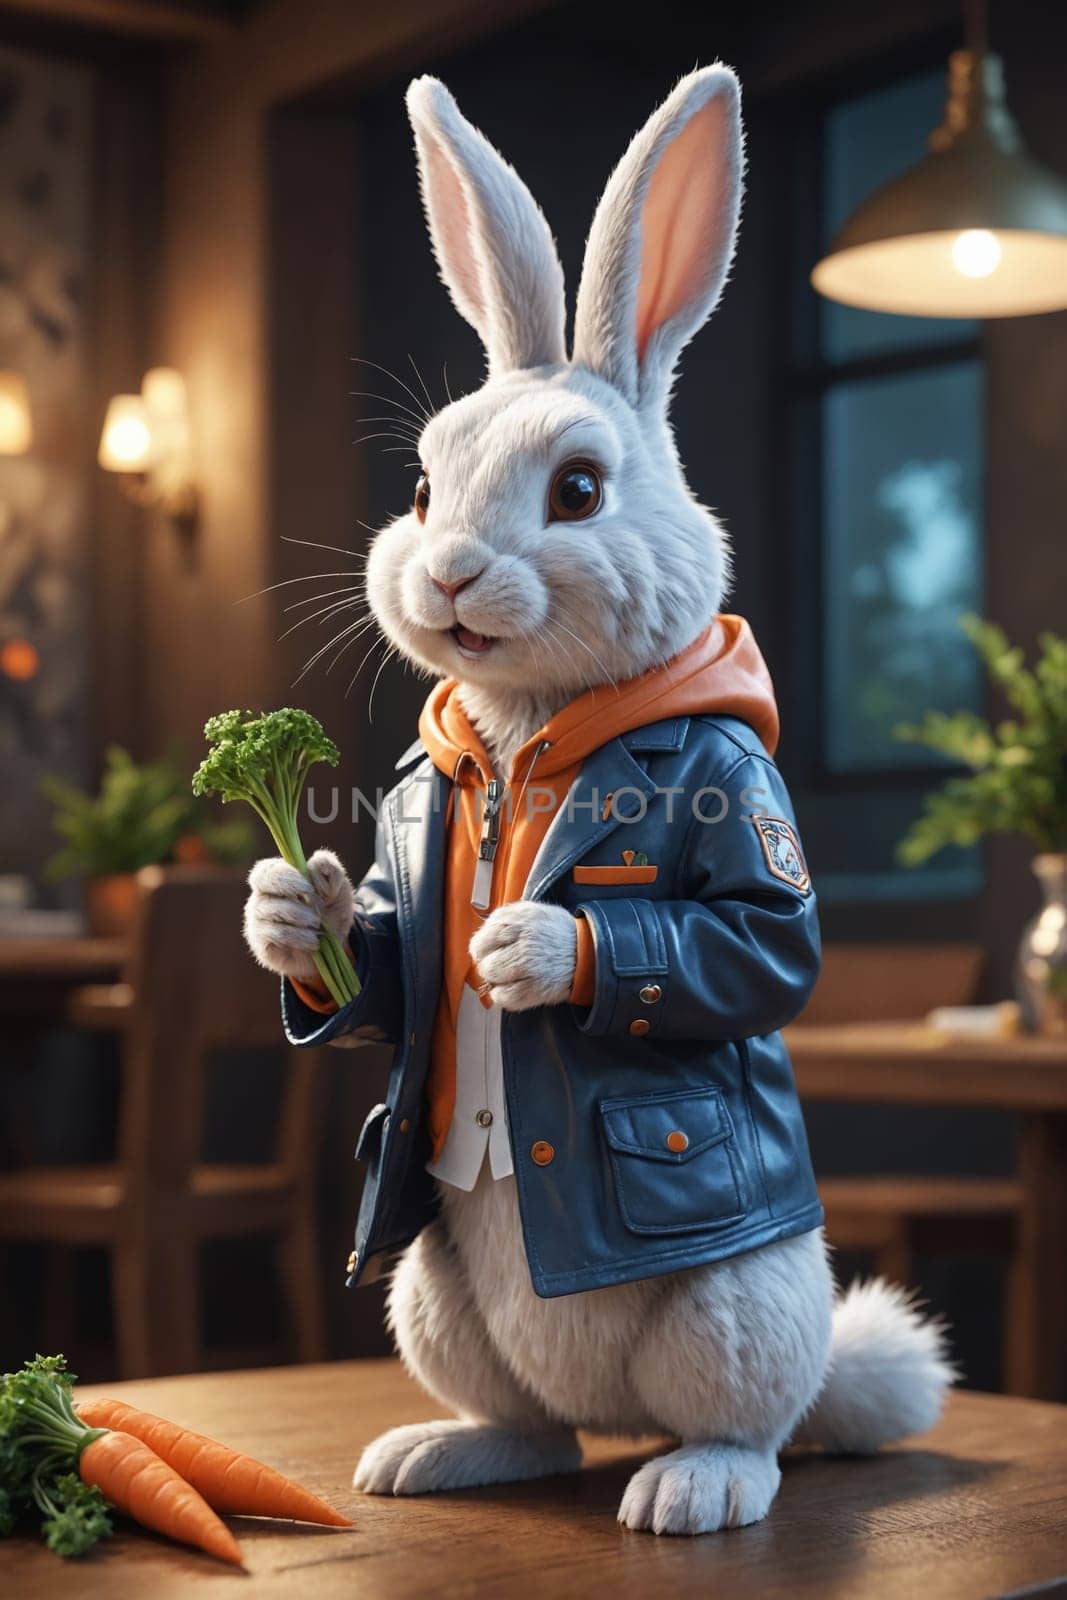 "Hip and Cool: The Carrot-Carrying Rabbit in Fashion". by Andre1ns